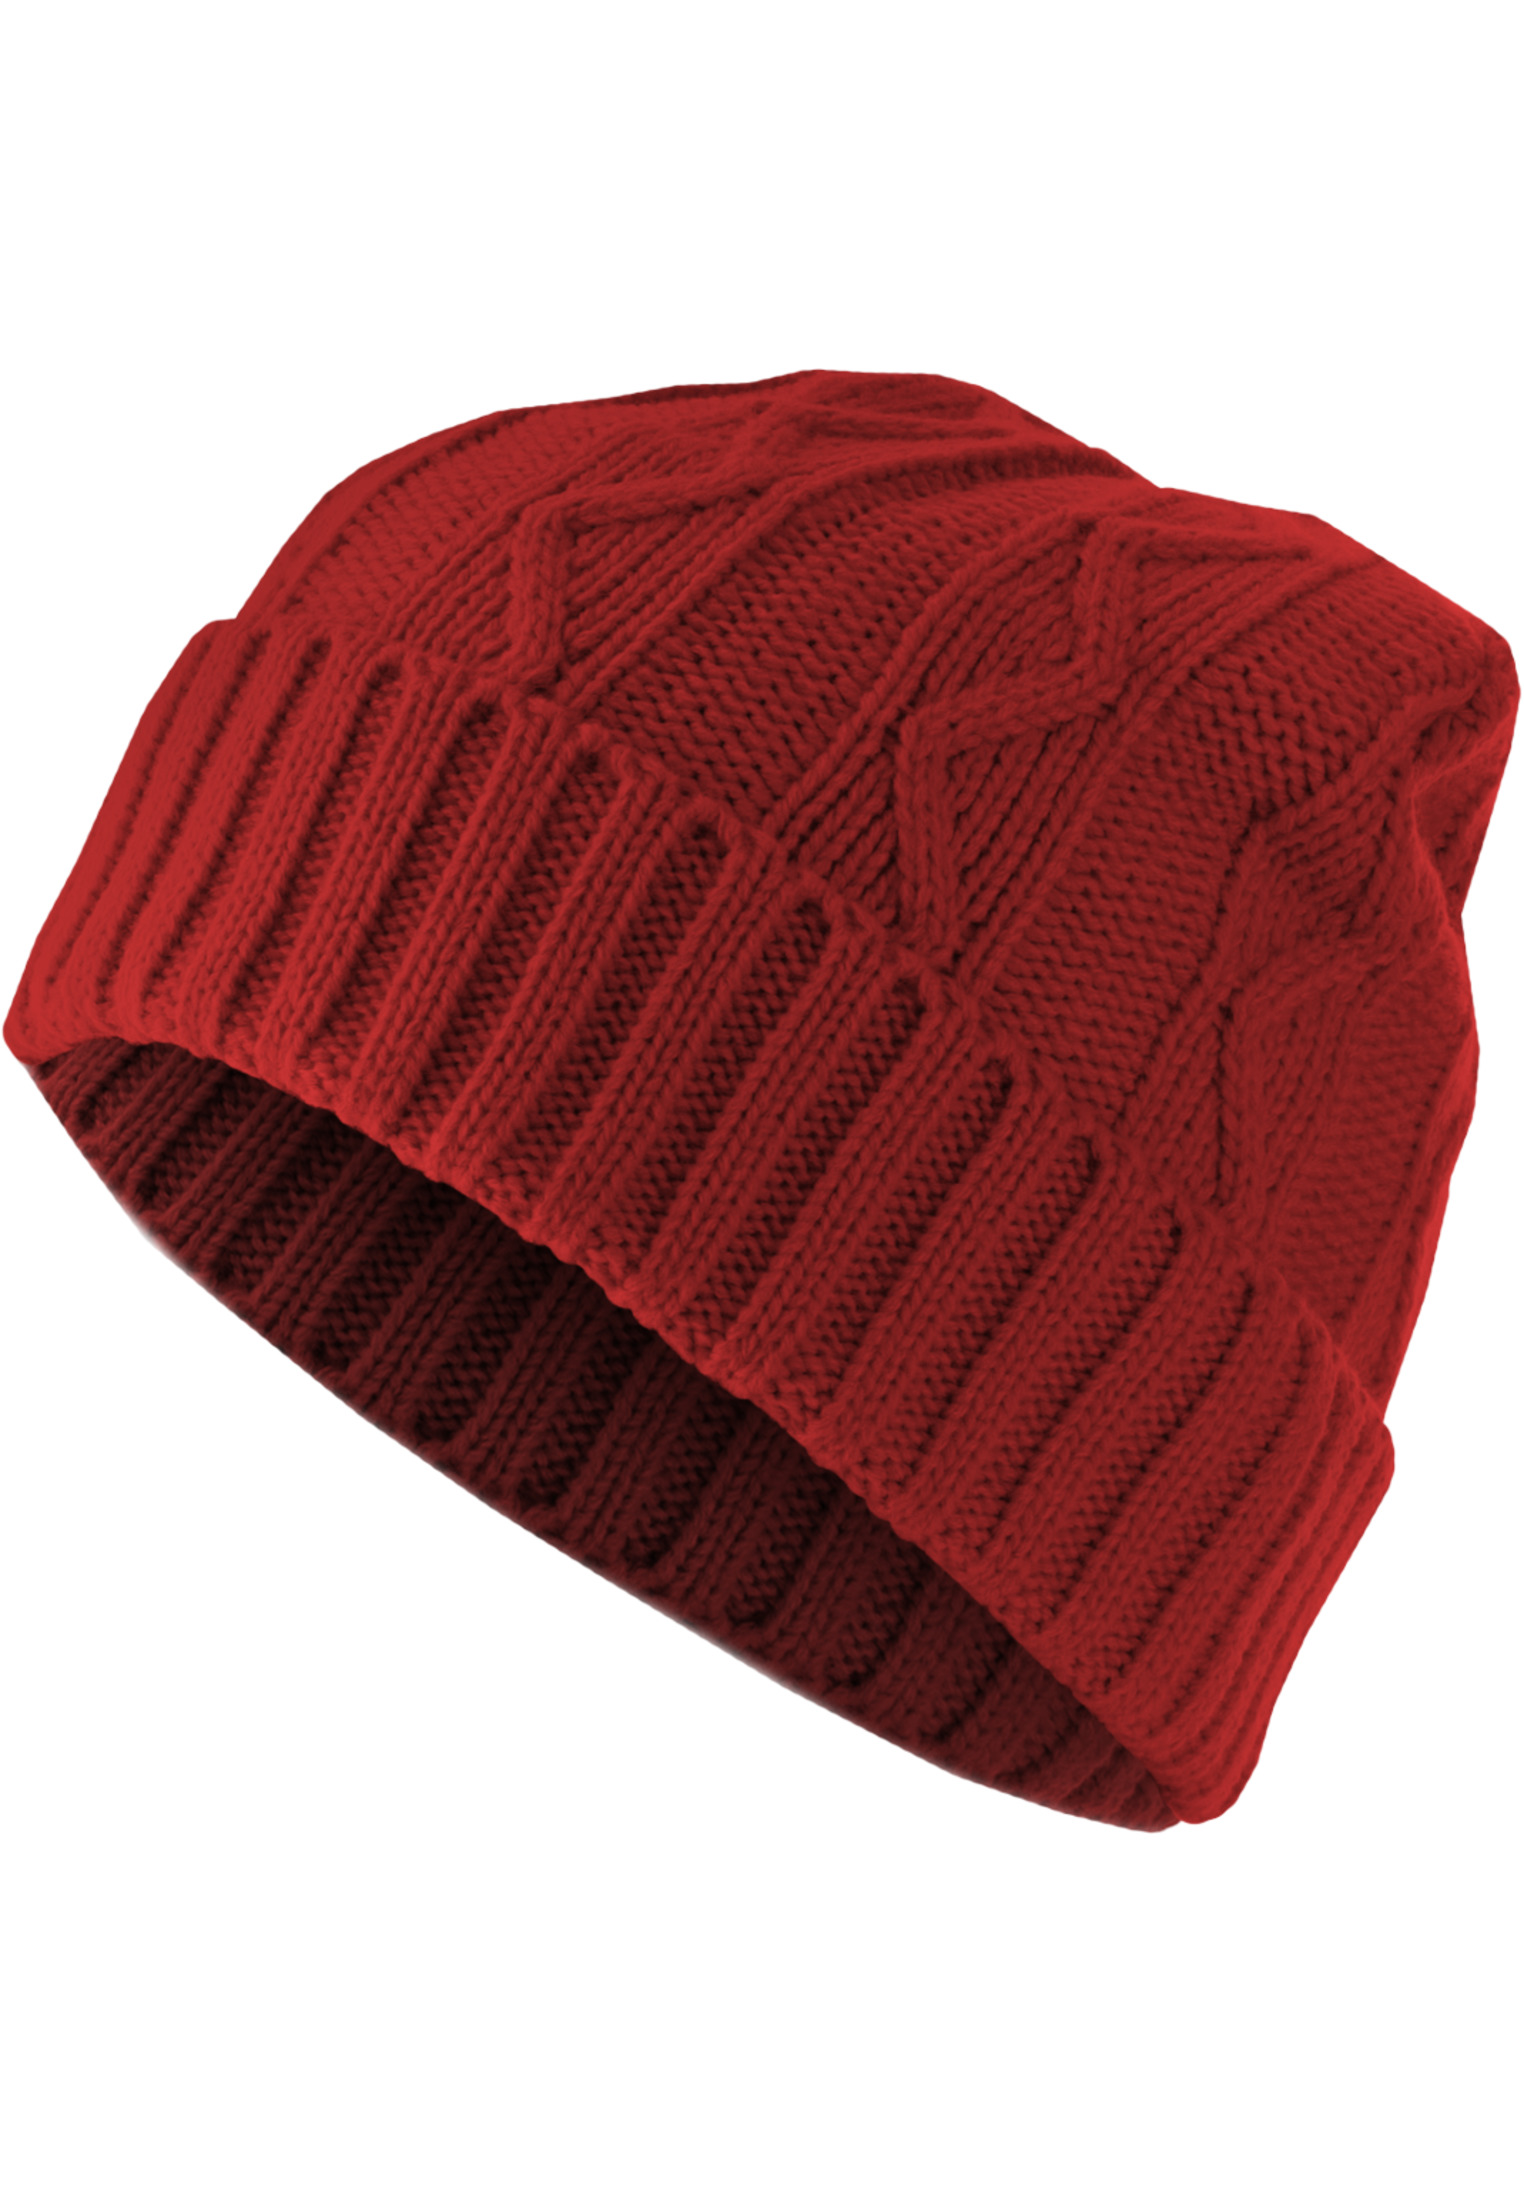 MSTRDS Beanie Cable Flap